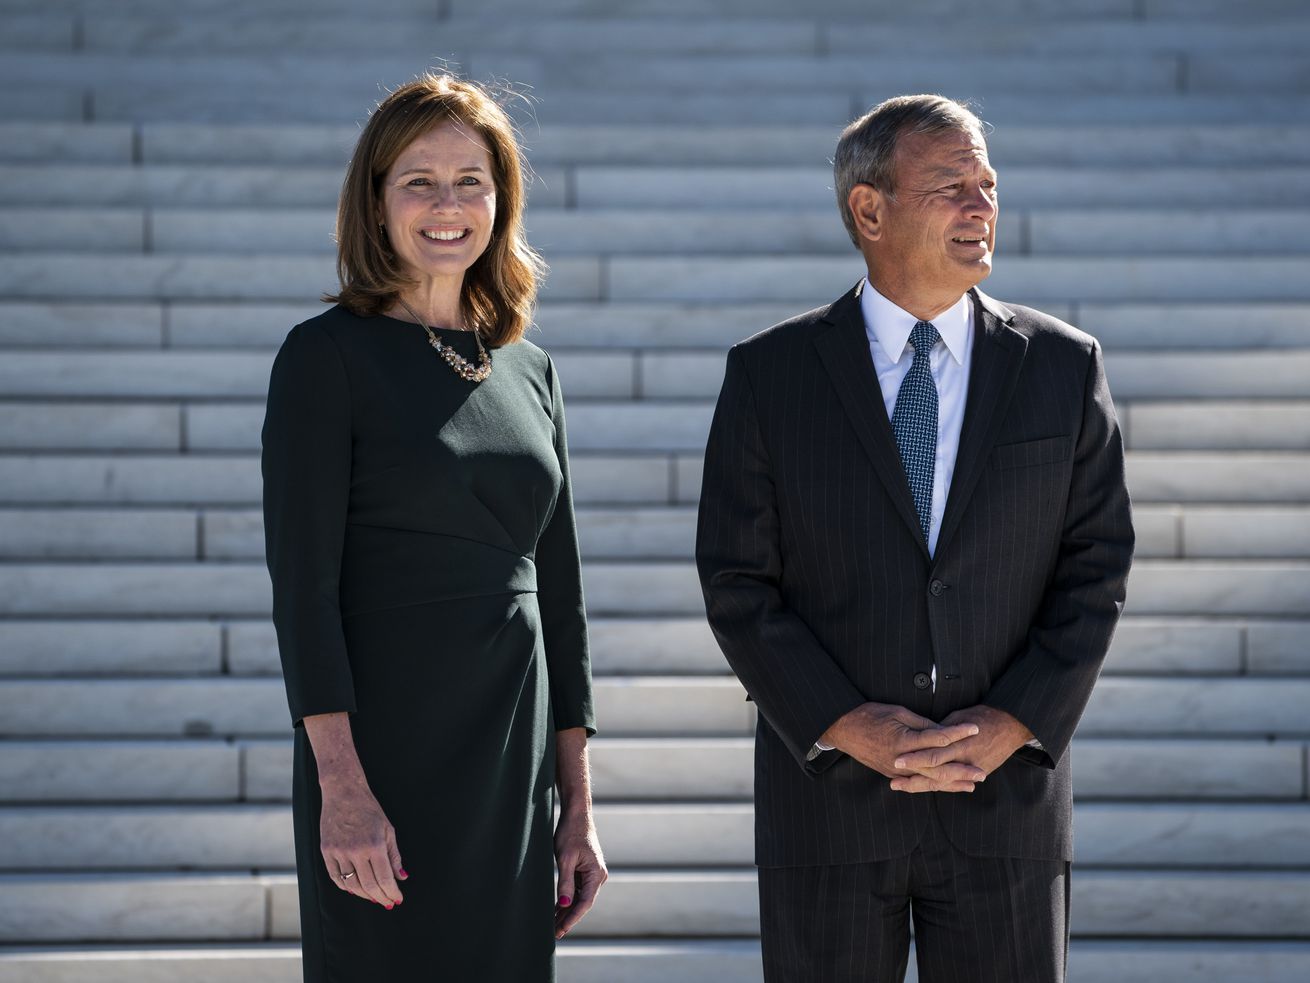 Barrett and Roberts standing in front of the steps of the Supreme Court.